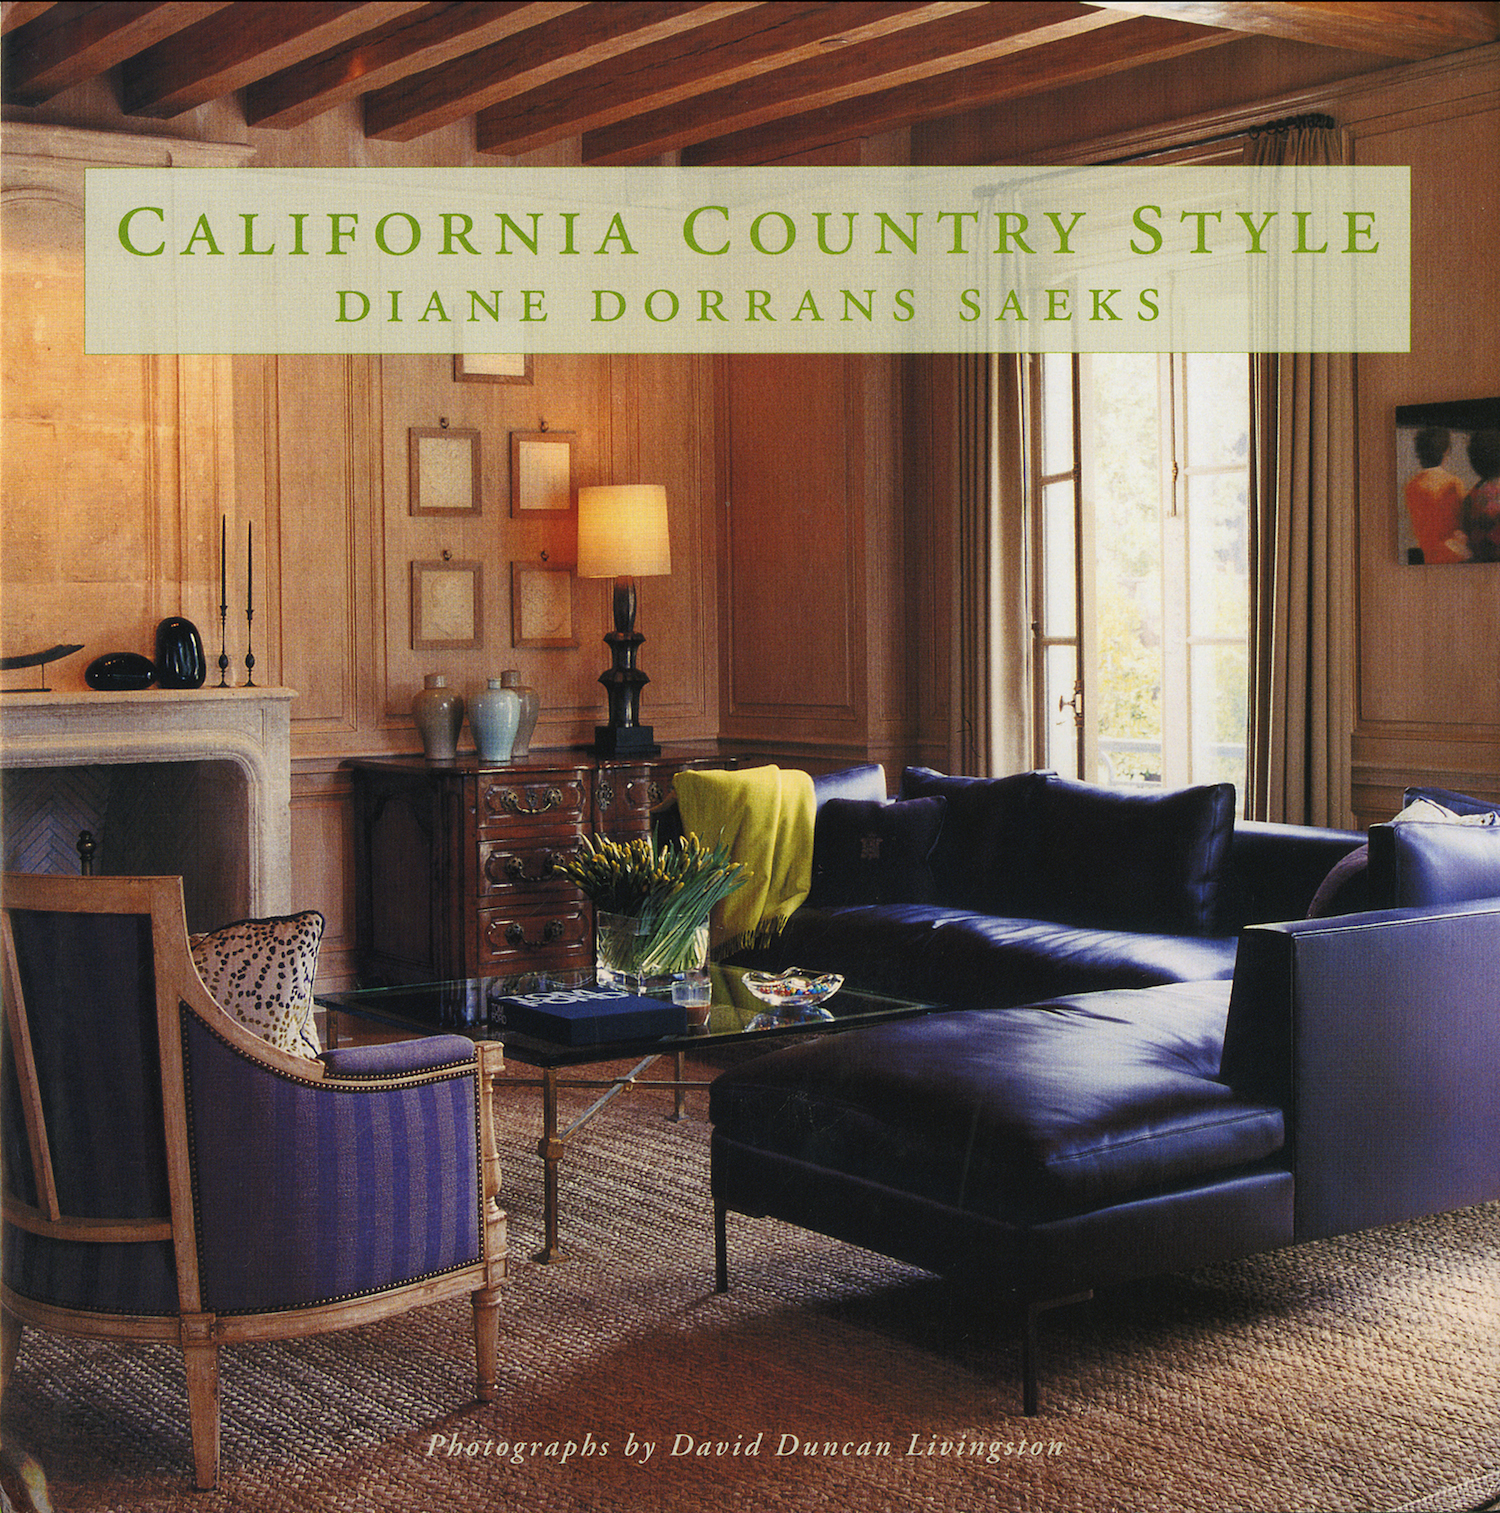 CaliforniaCountryStyle_cover.jpg